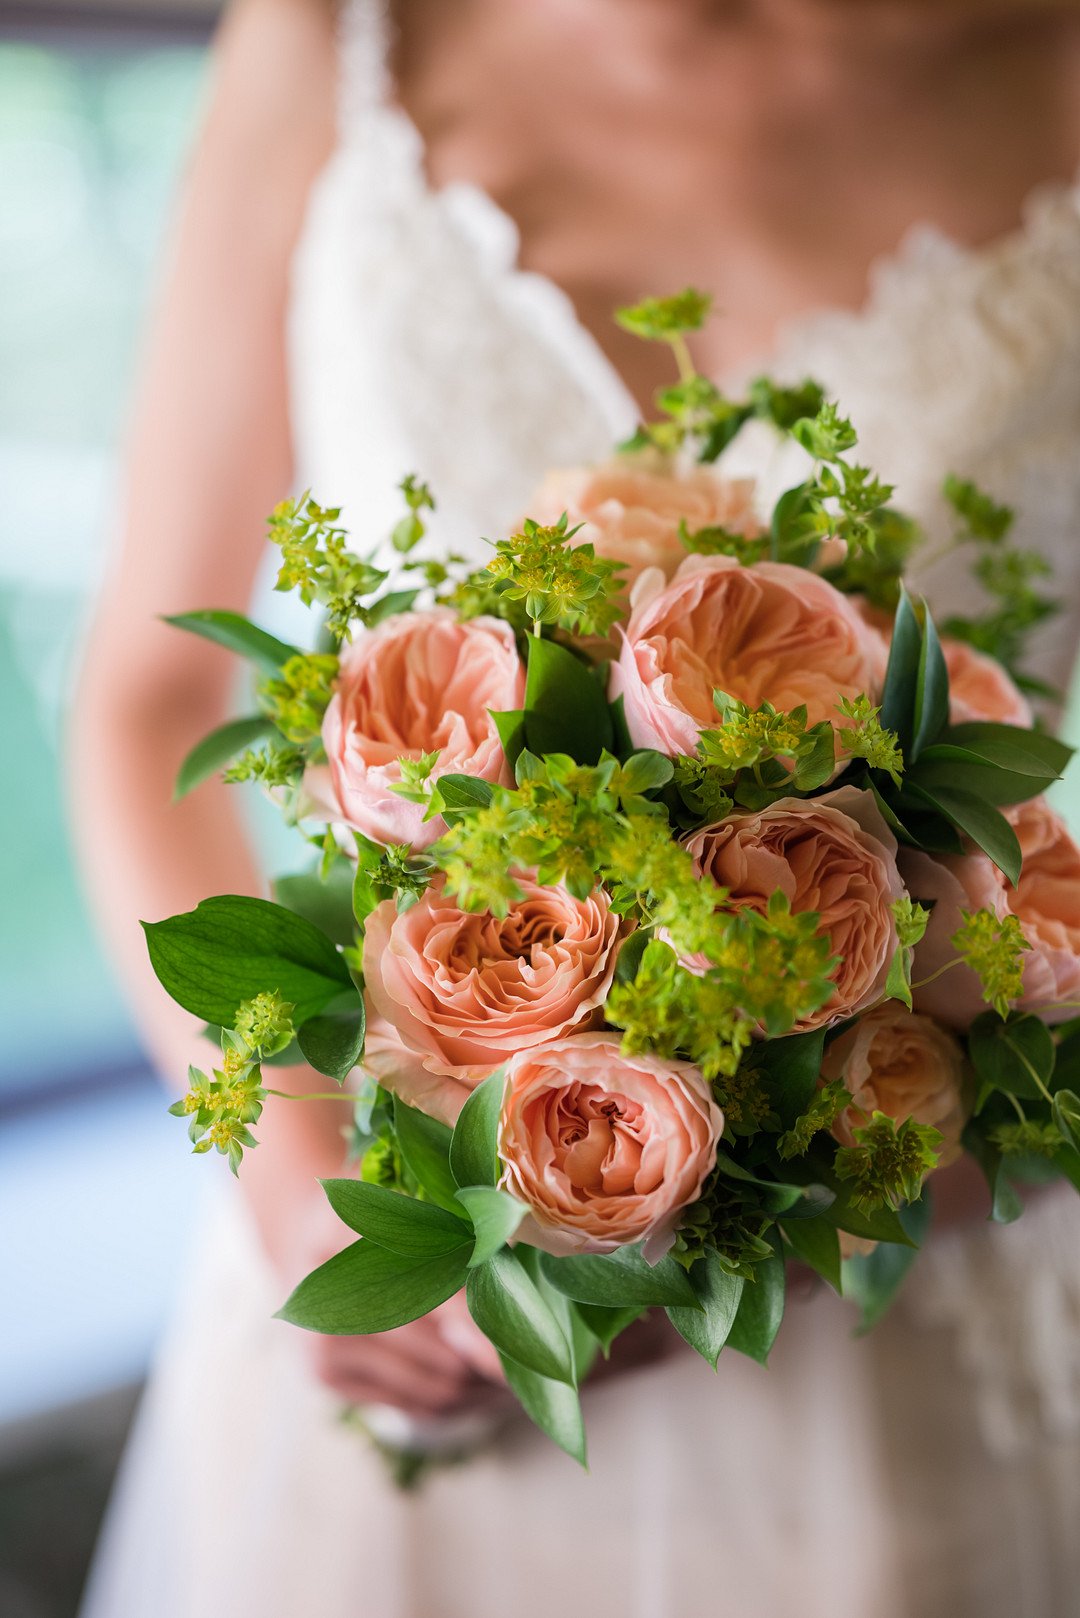 Chan_Chan_Winterlyn Photography_GLESSNER HOUSE CHICAGO WEDDING-21_low.jpg